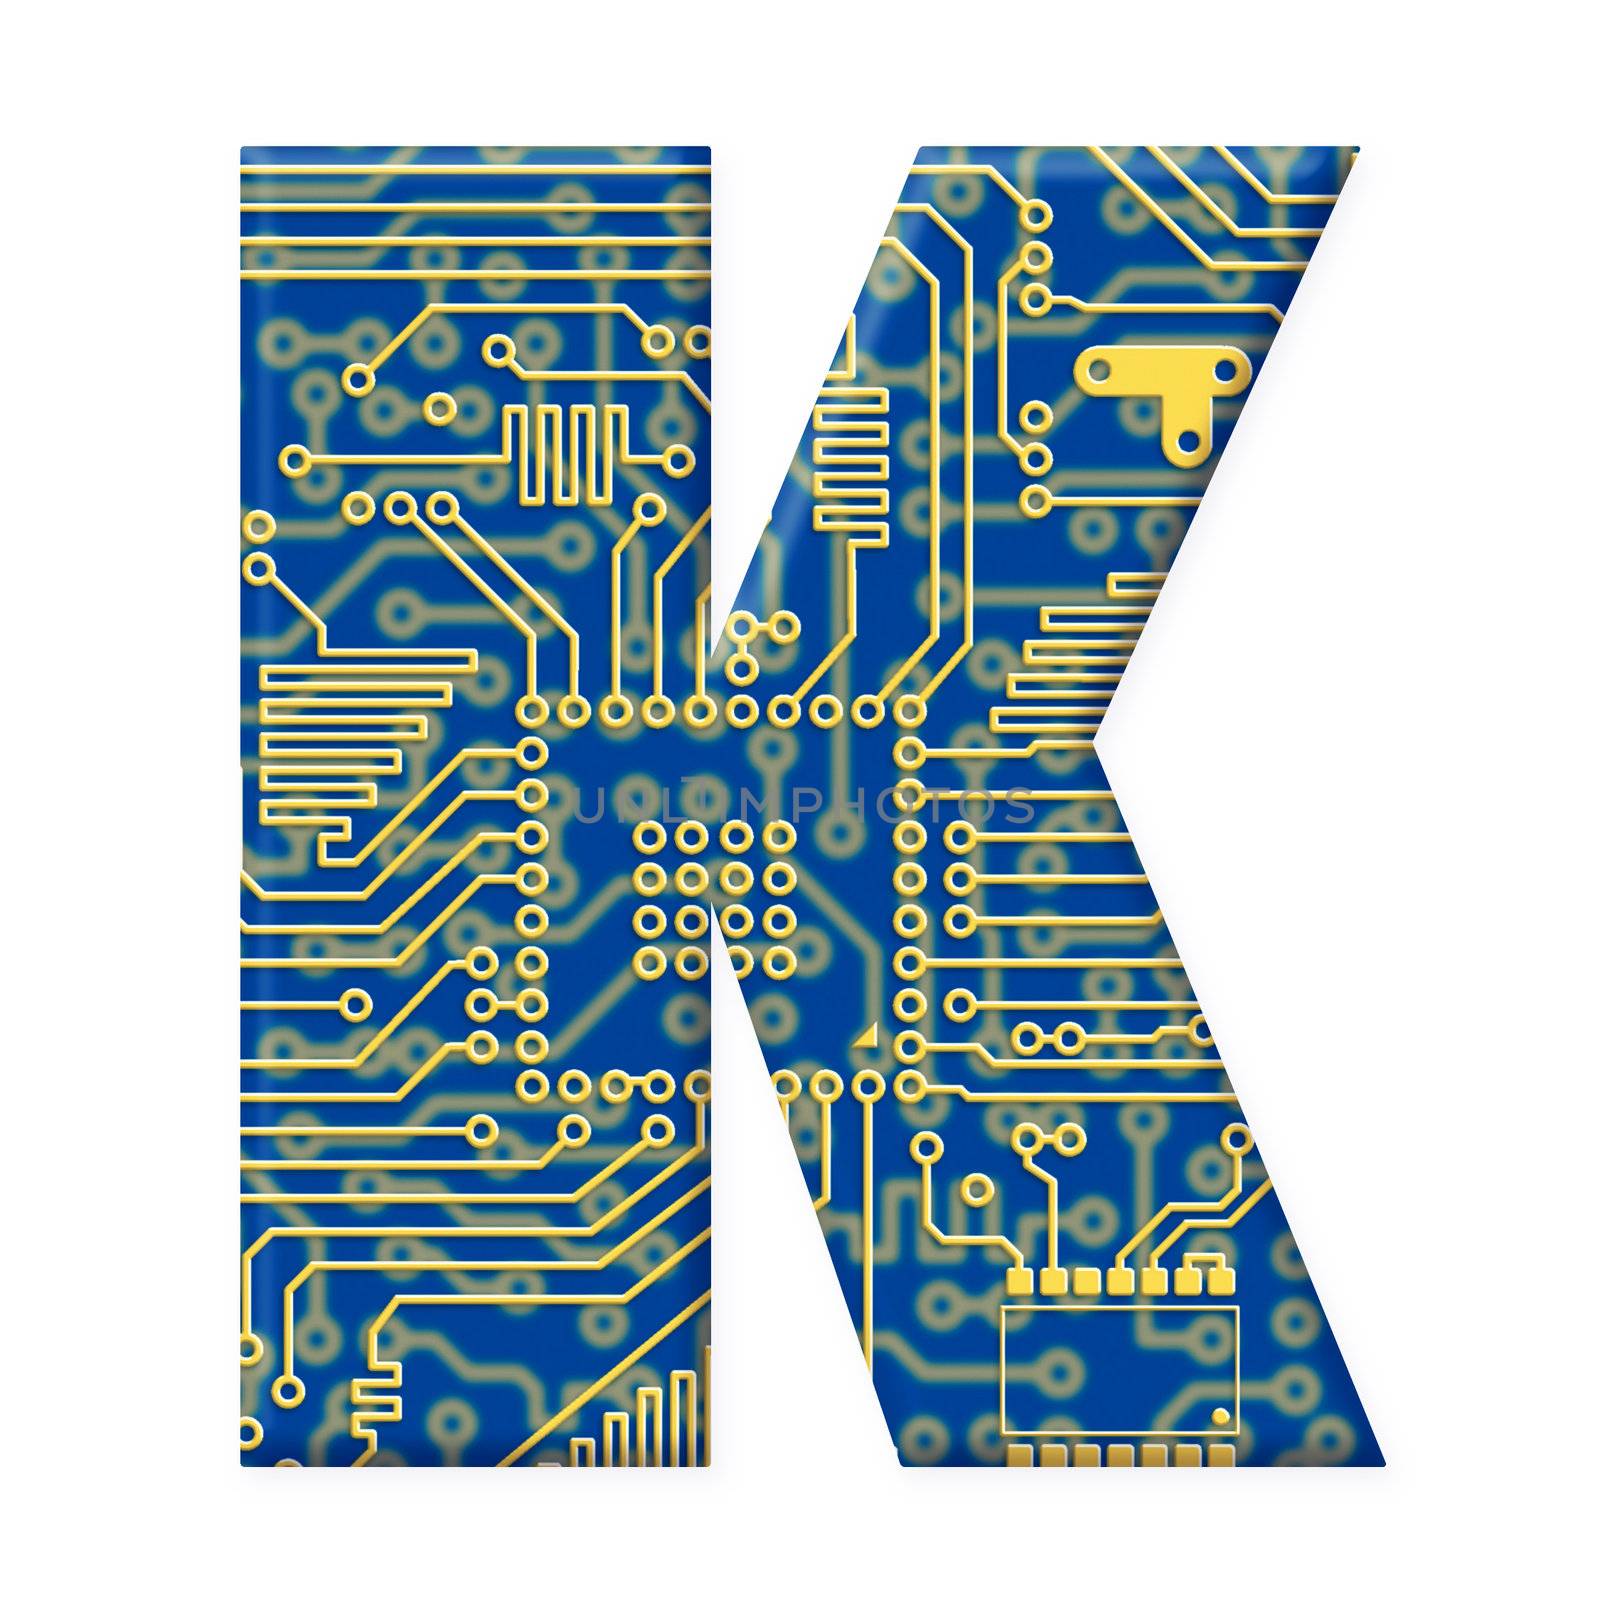 One letter from the electronic technology circuit board alphabet on a white background - K